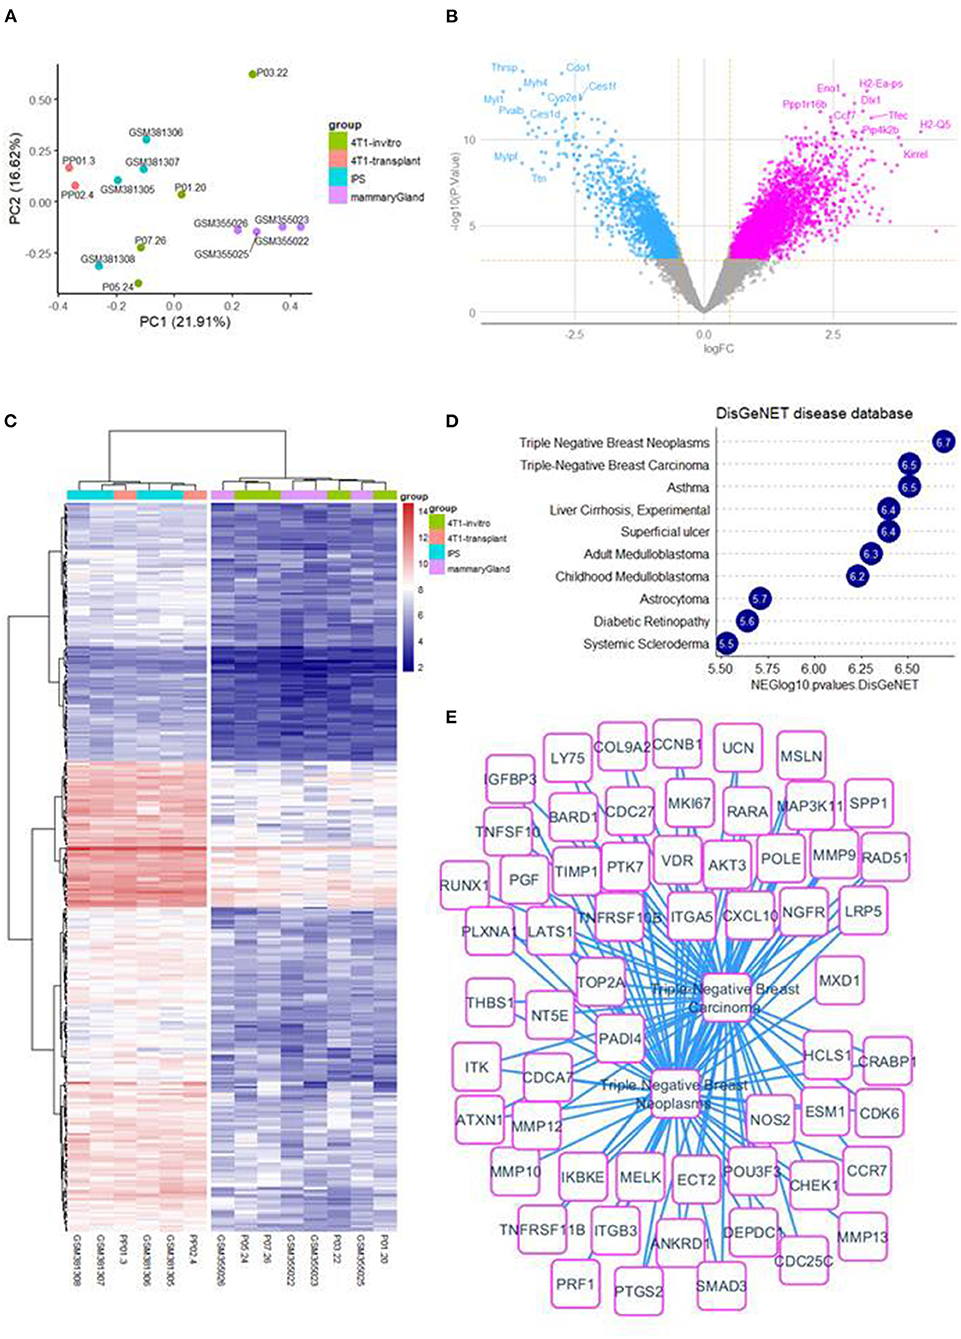 Frontiers Evidence Of Antitumor And Antimetastatic Potential Of Induced Pluripotent Stem Cell Based Vaccines In Cancer Immunotherapy